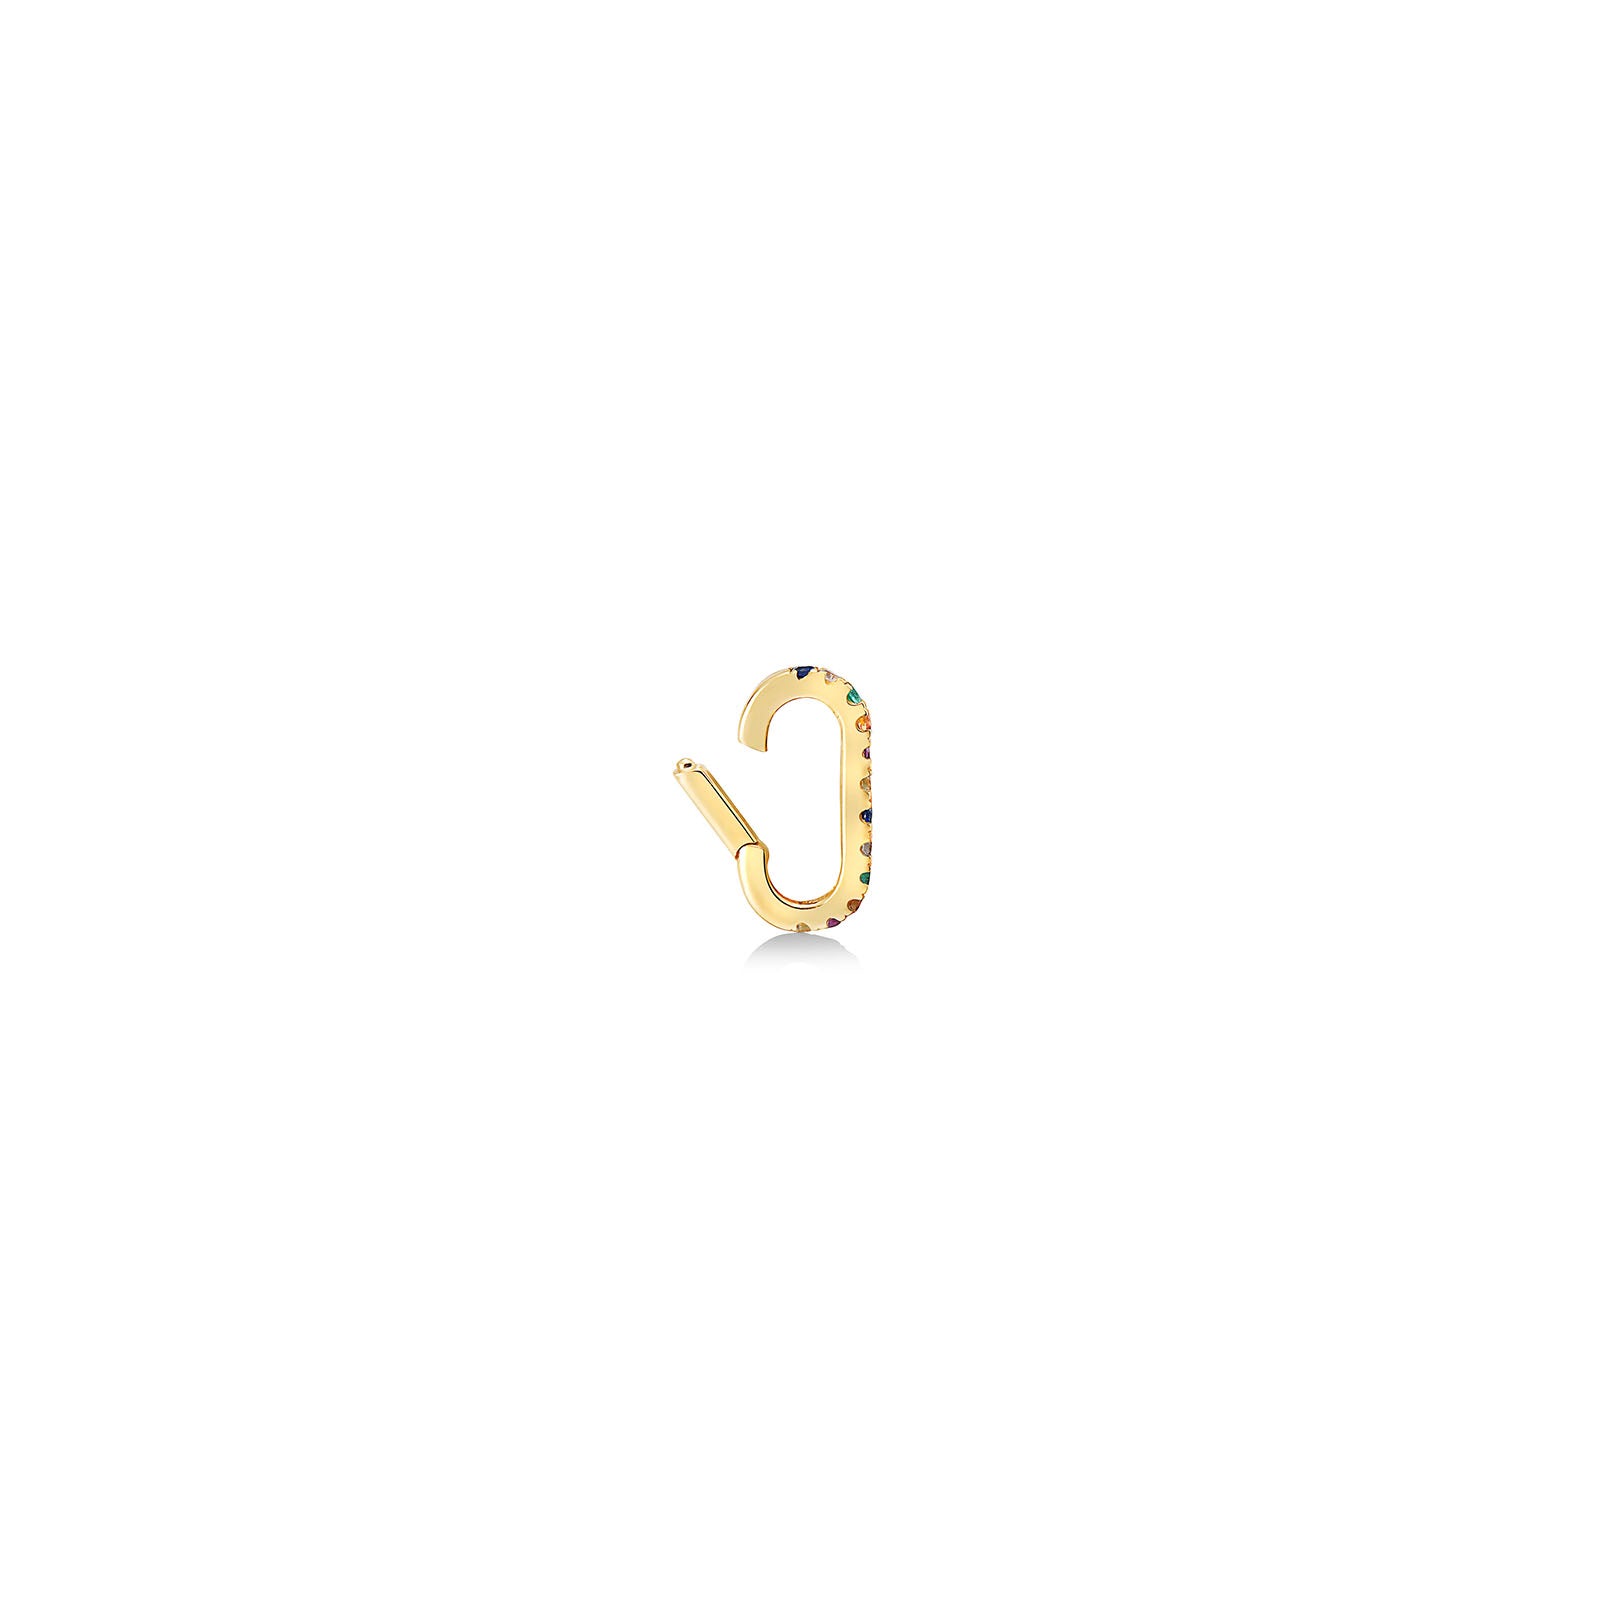 14k yellow gold small oval locking charm with rainbow colored stones.